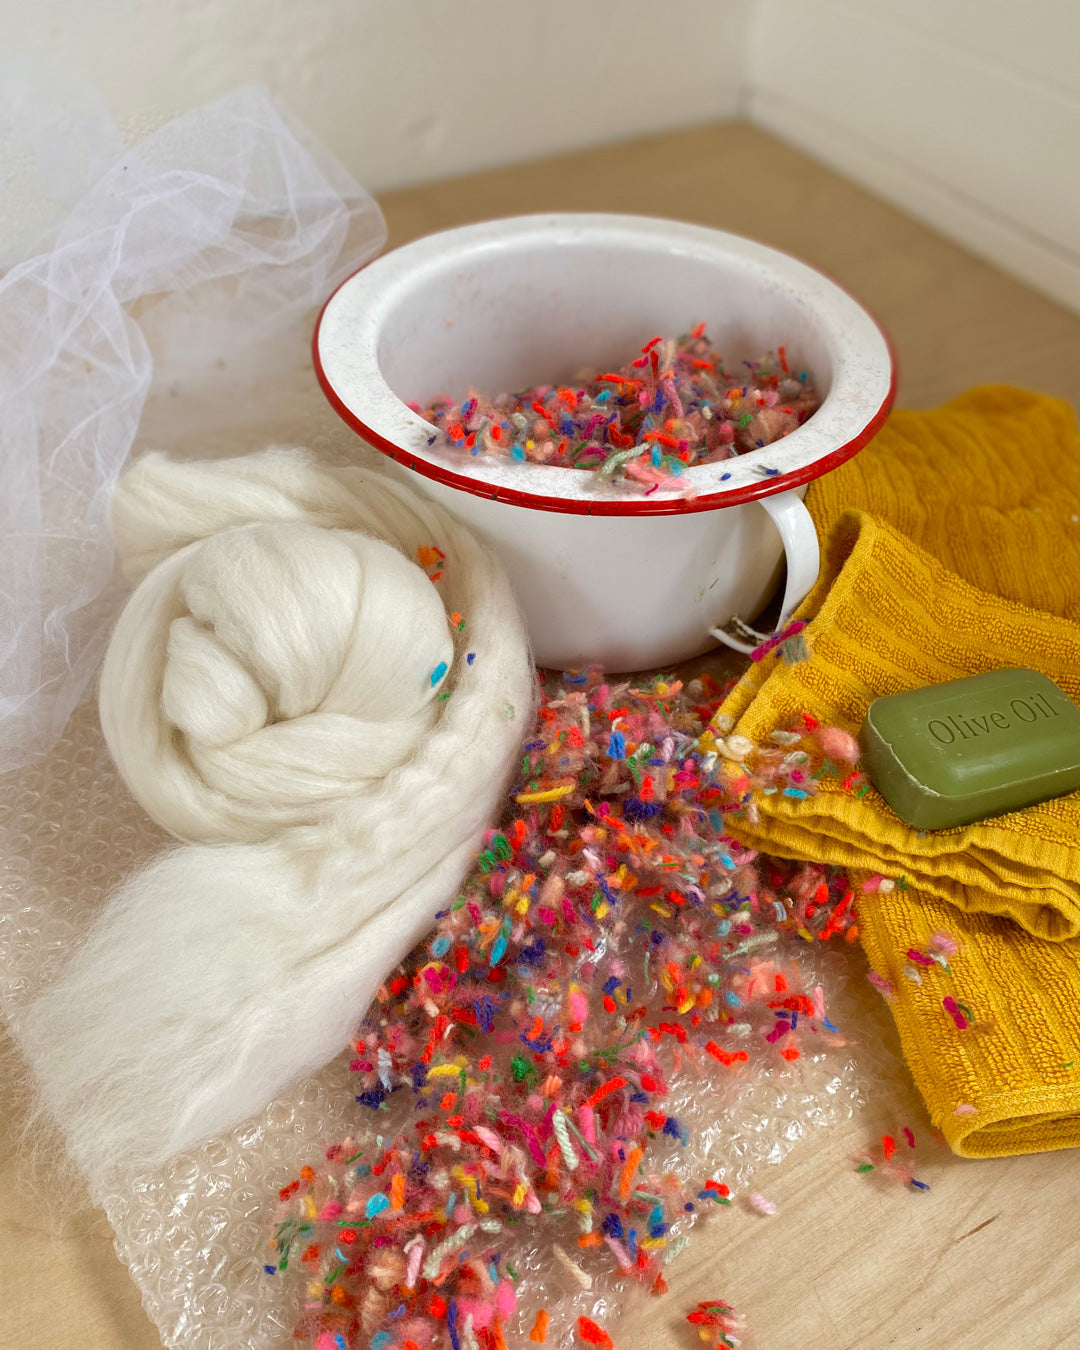 Bowl filled with colorful wet felting scraps alongside white wool and olive soap, demonstrating the felting materials.